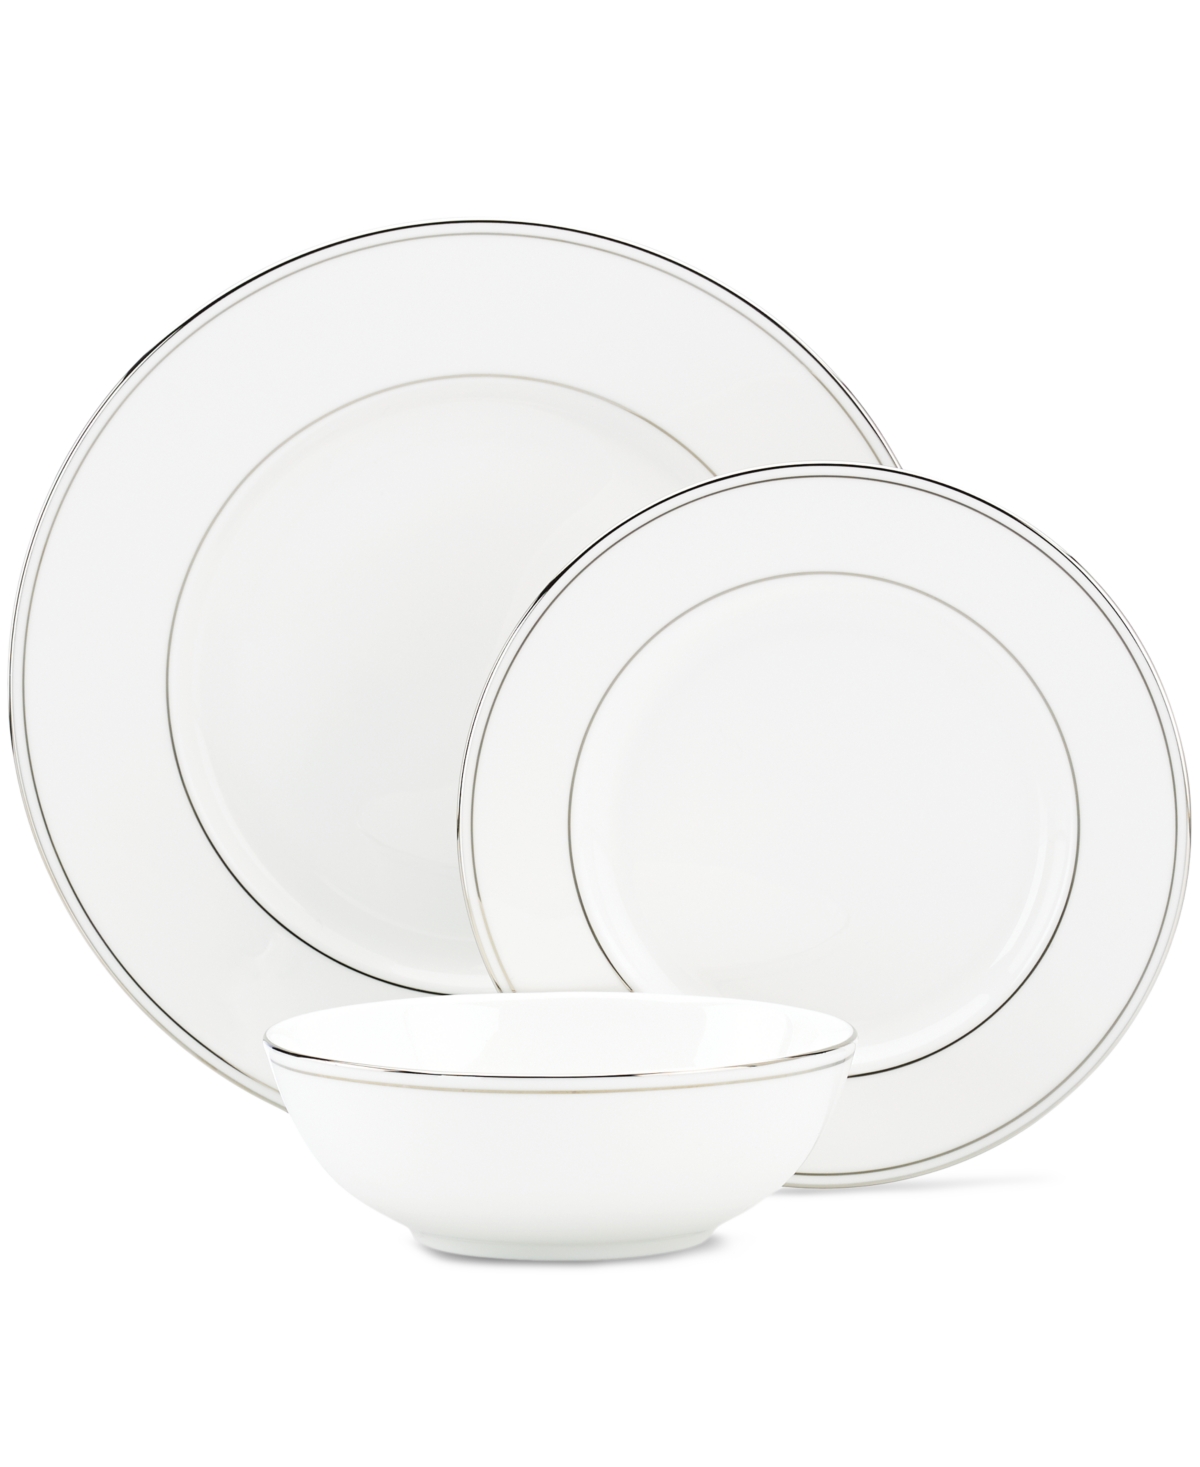 Lenox Federal Platinum 3-piece Place Setting In No Color